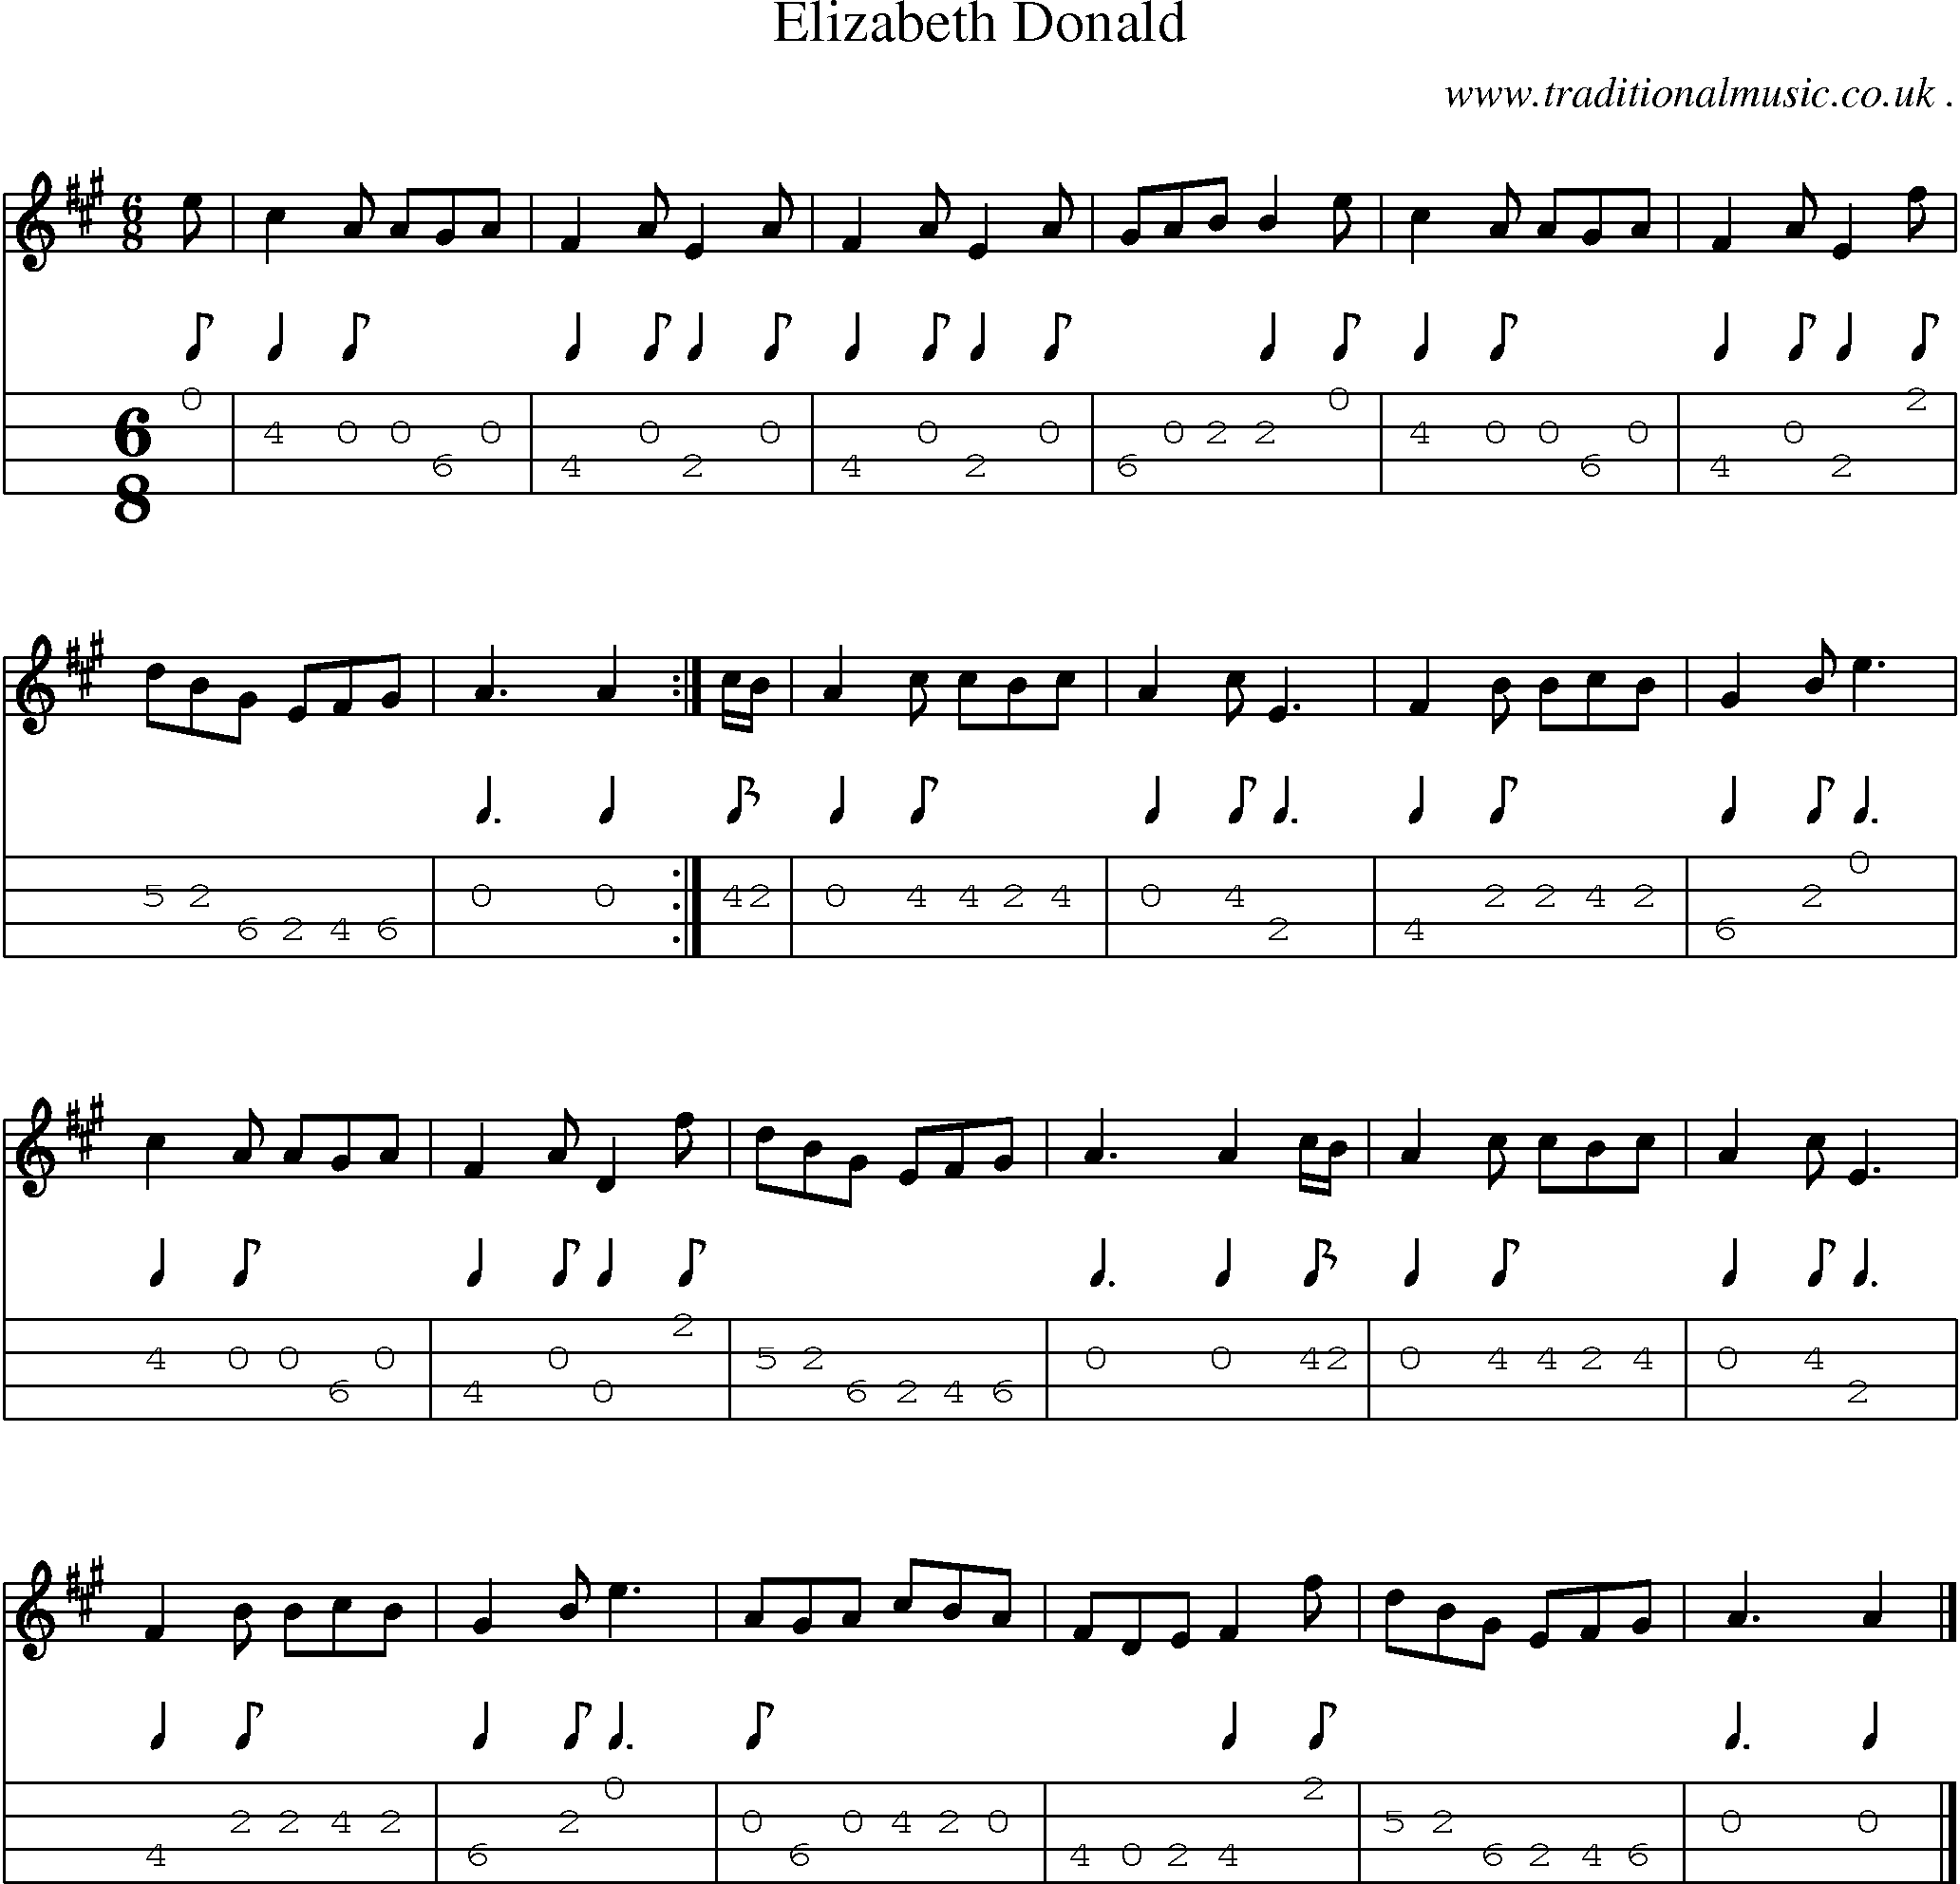 Sheet-music  score, Chords and Mandolin Tabs for Elizabeth Donald